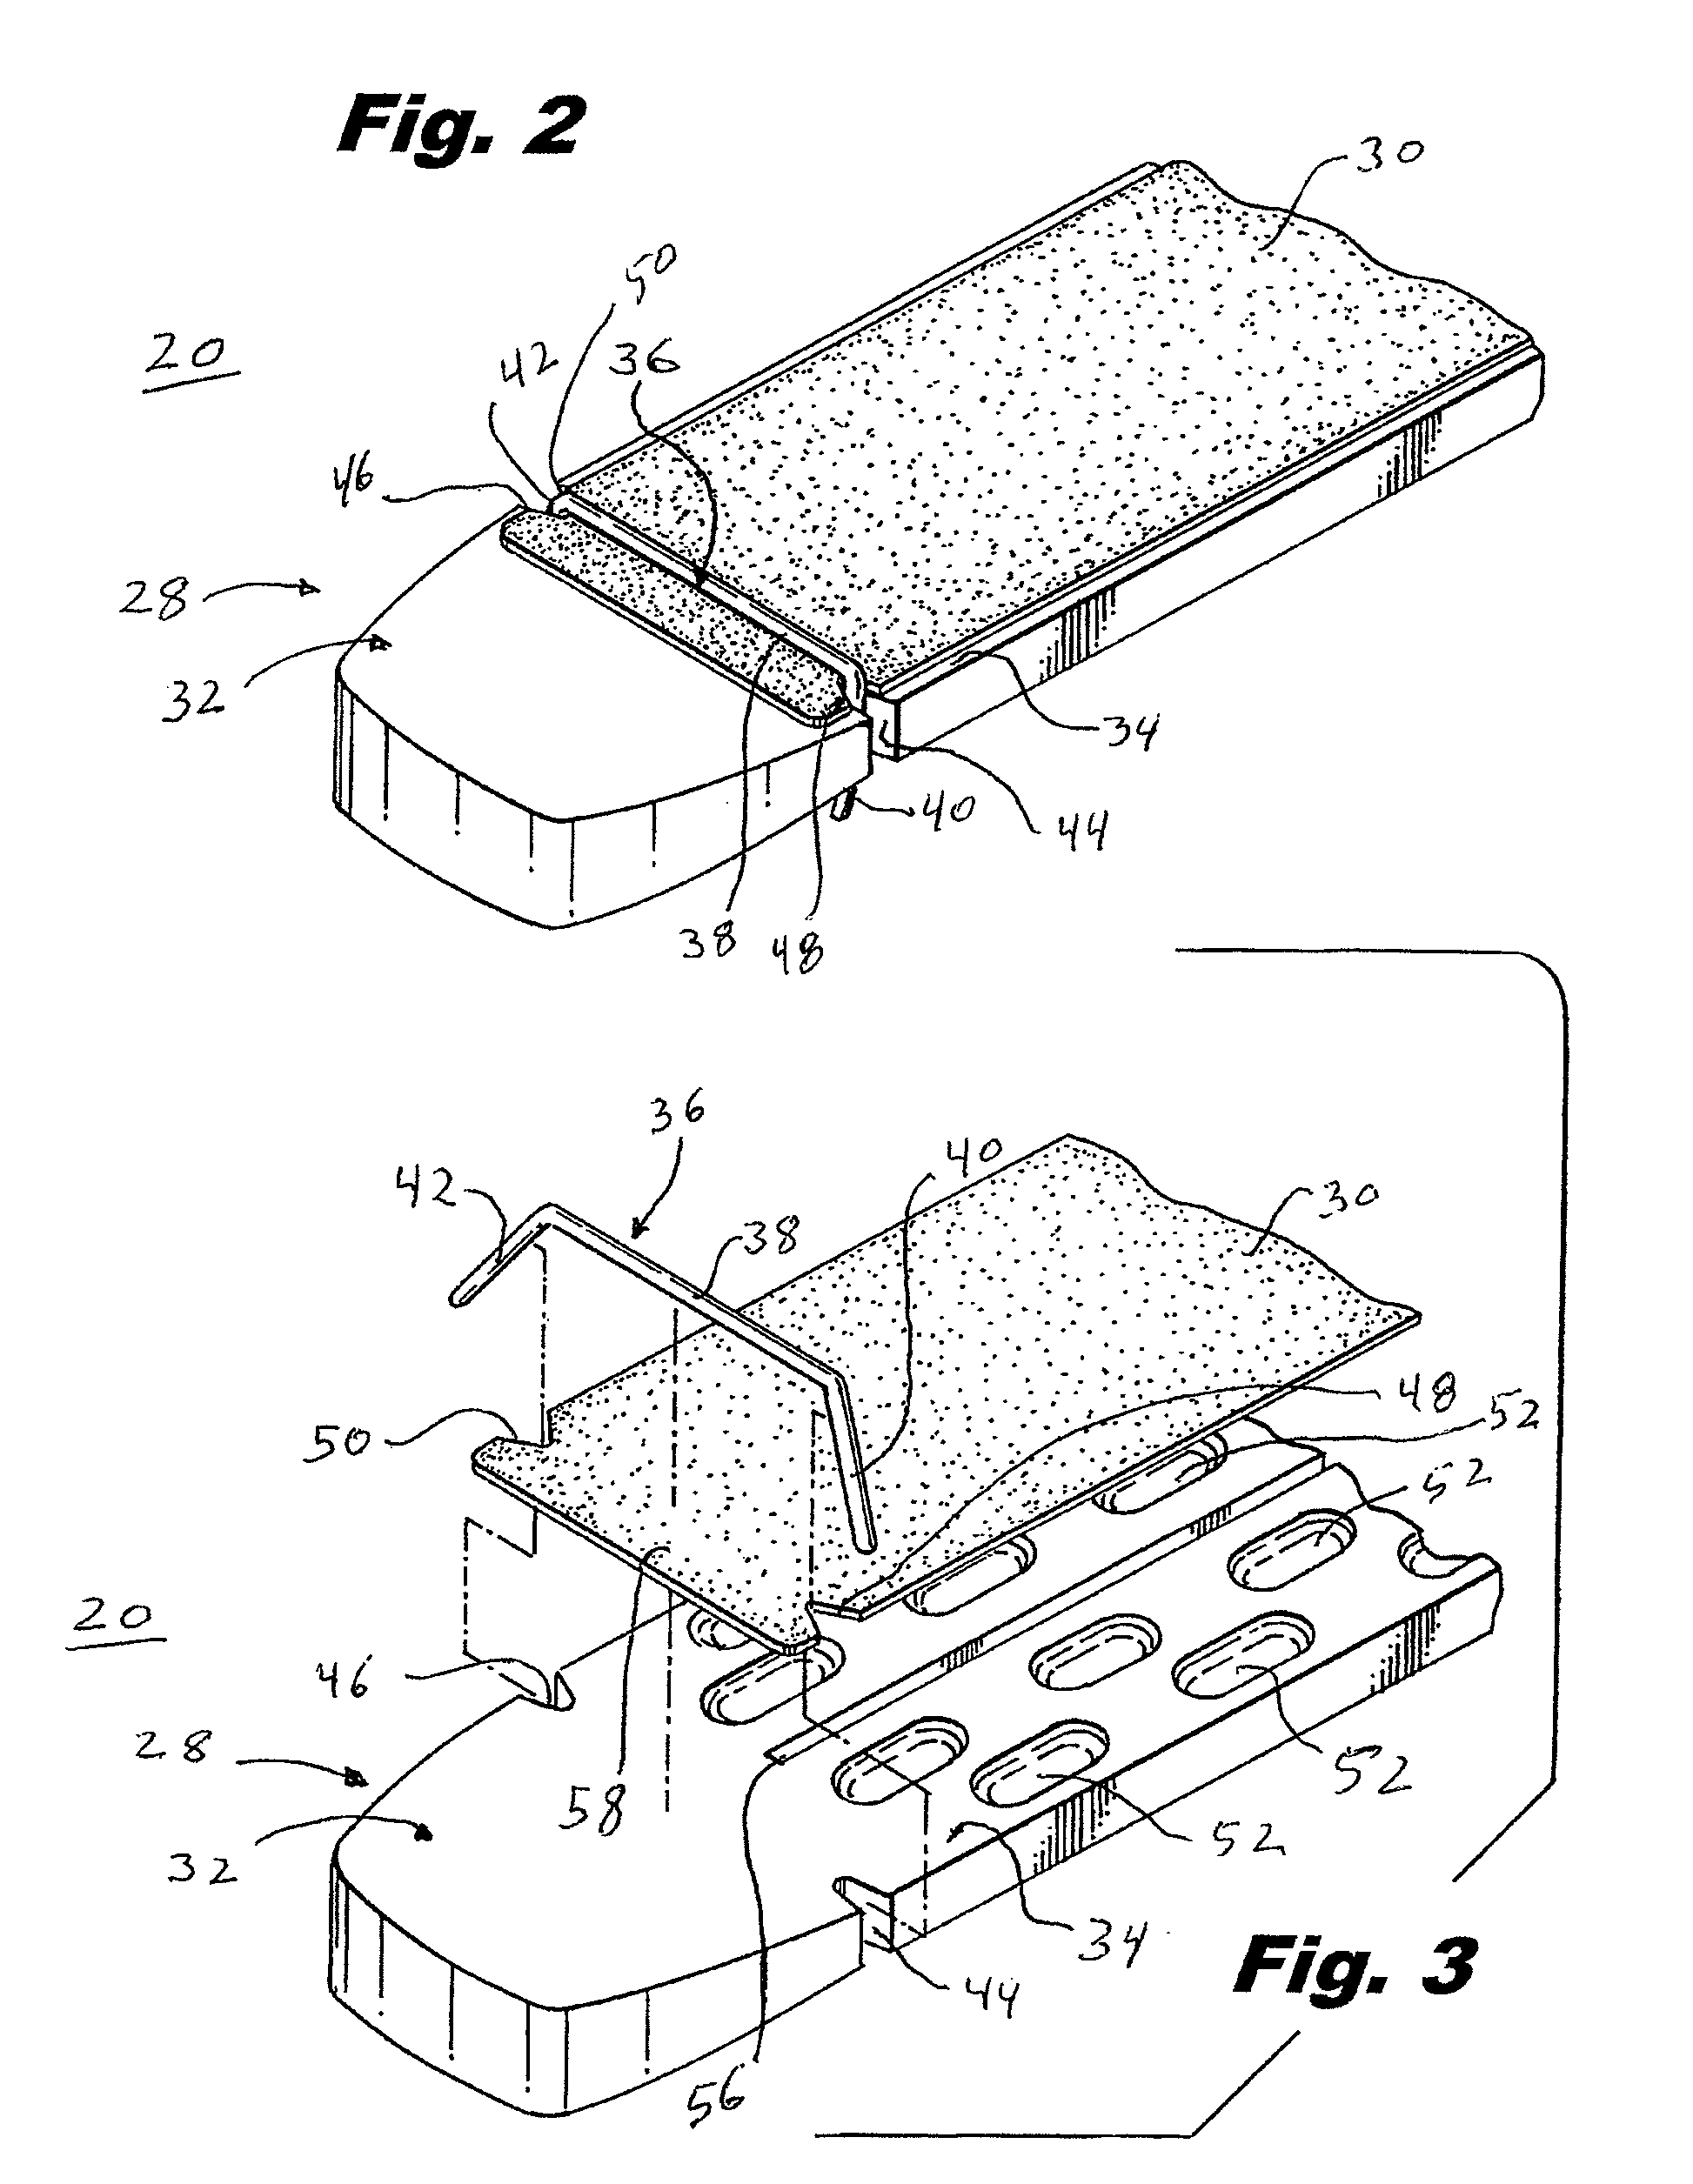 Crimp and release of suture holding buttress material